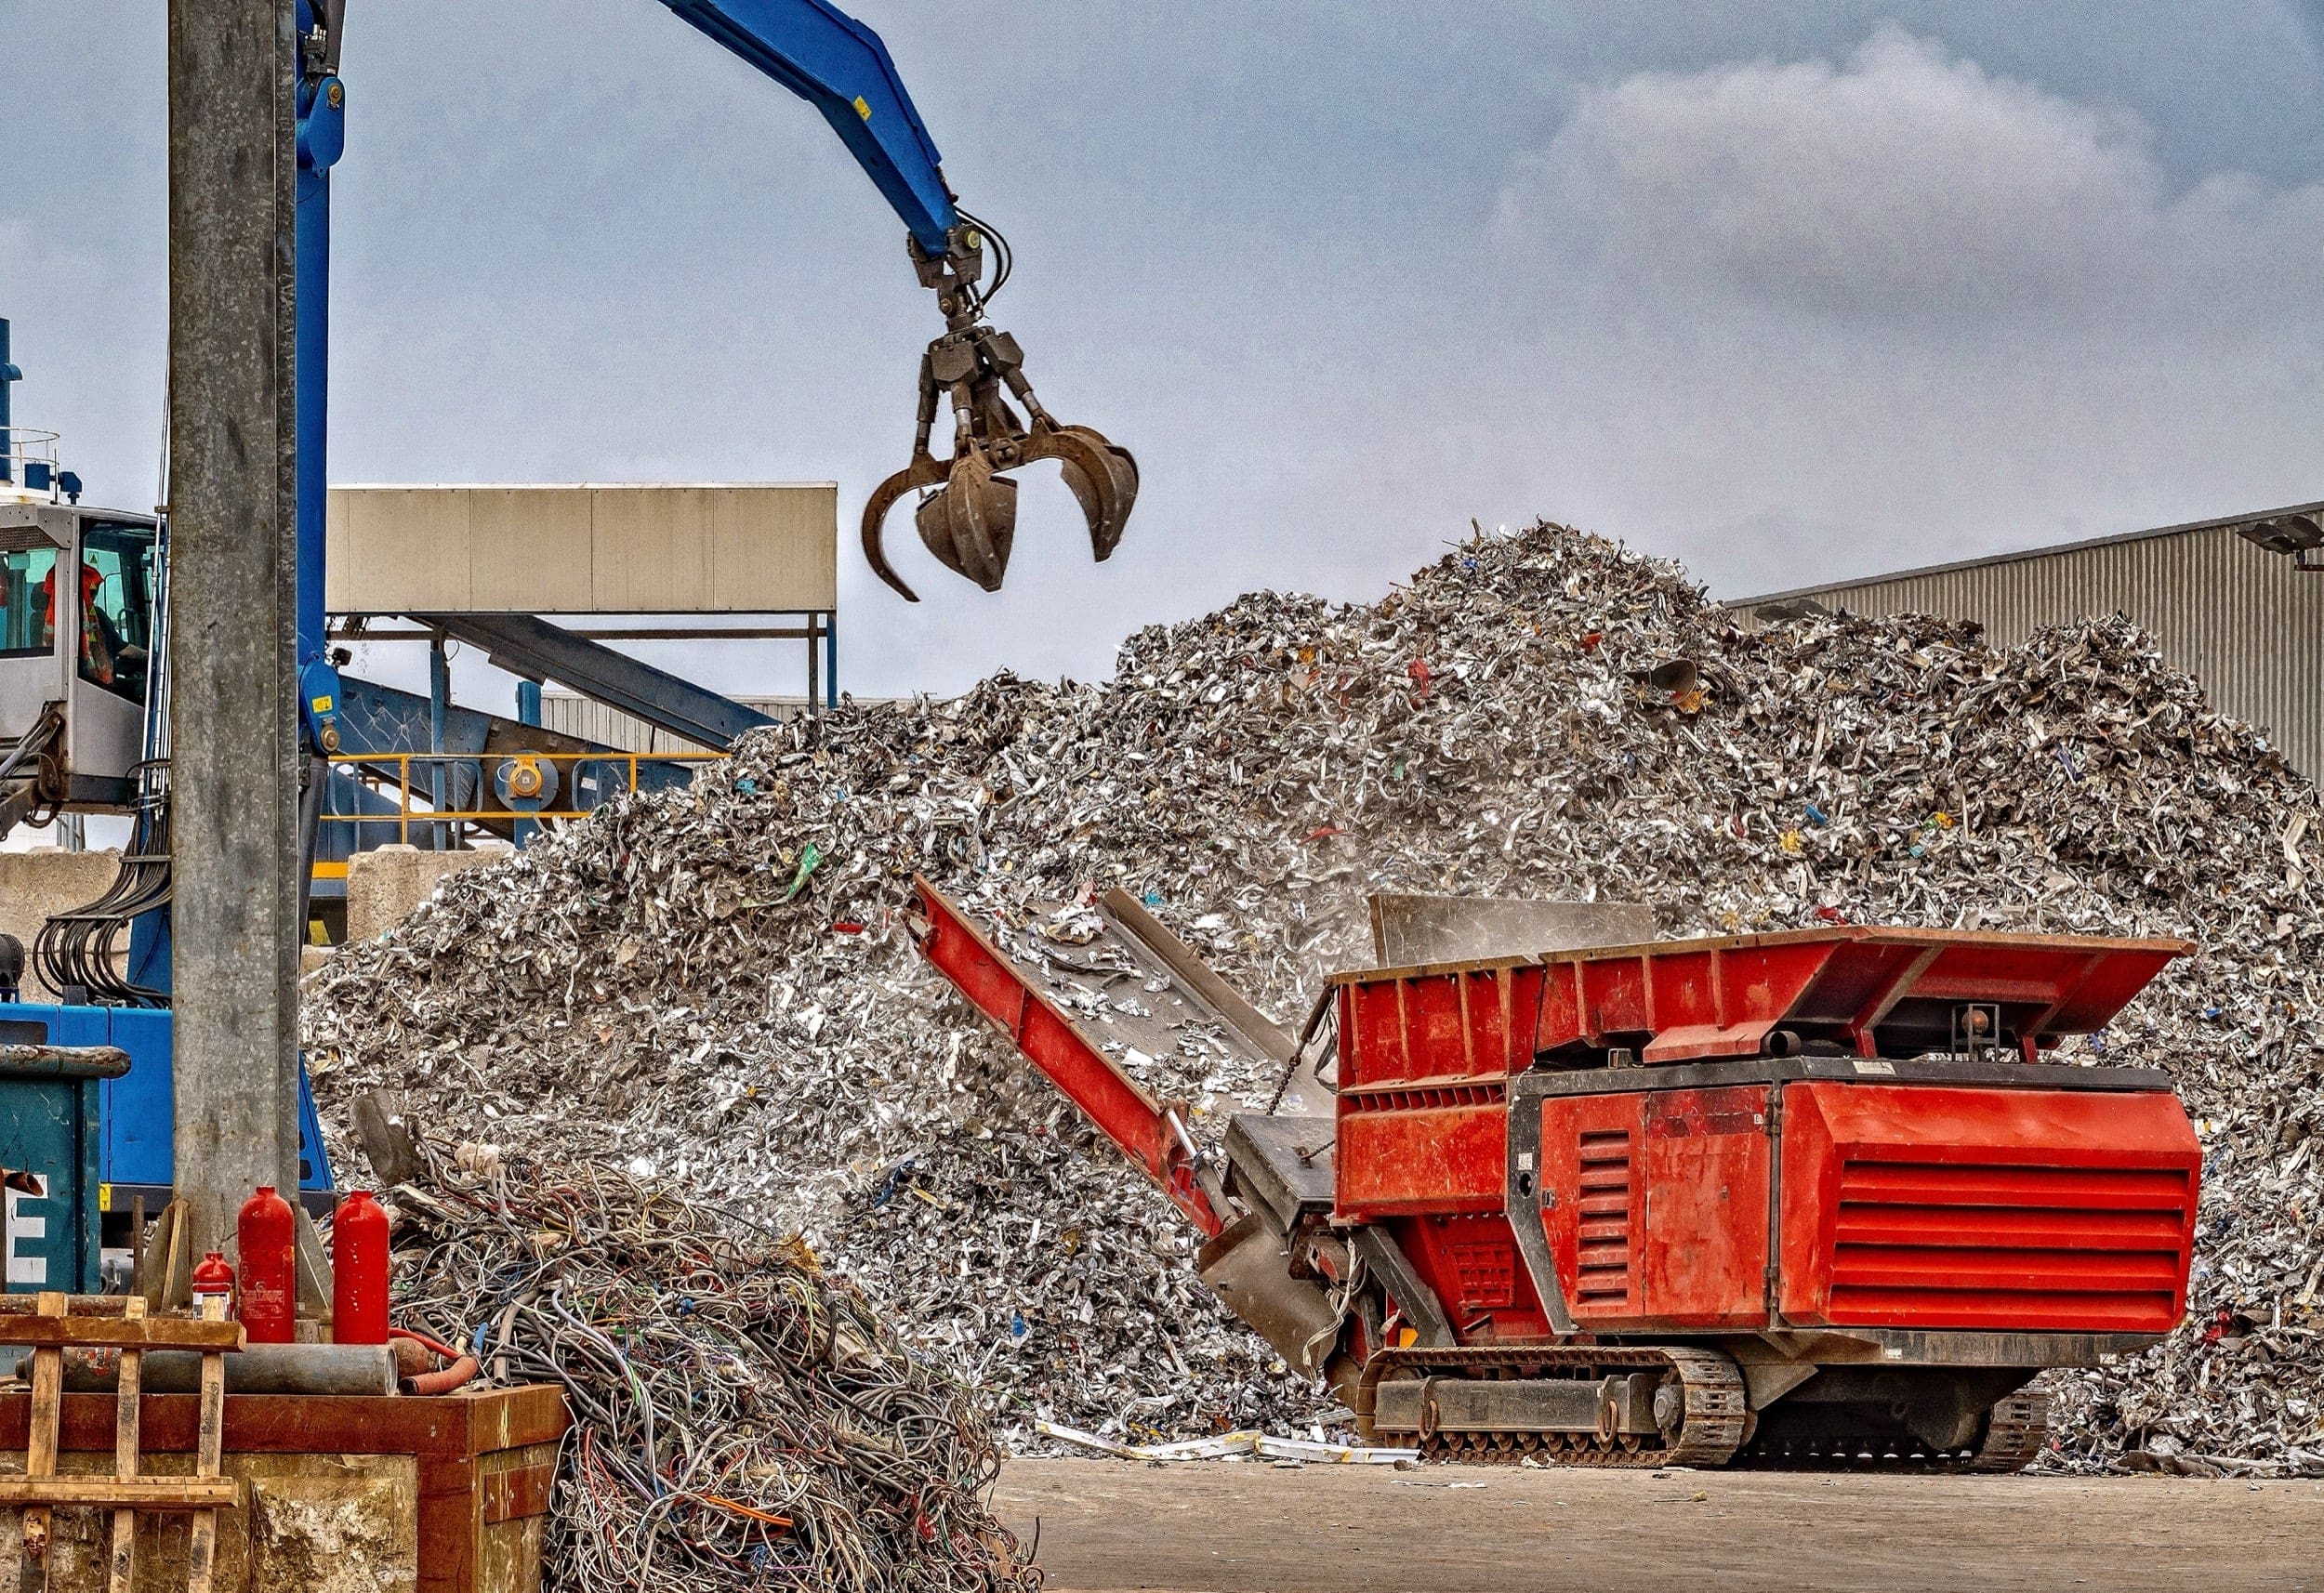 A robust scrapping and recycling industry distinguishes metals from other building materials.